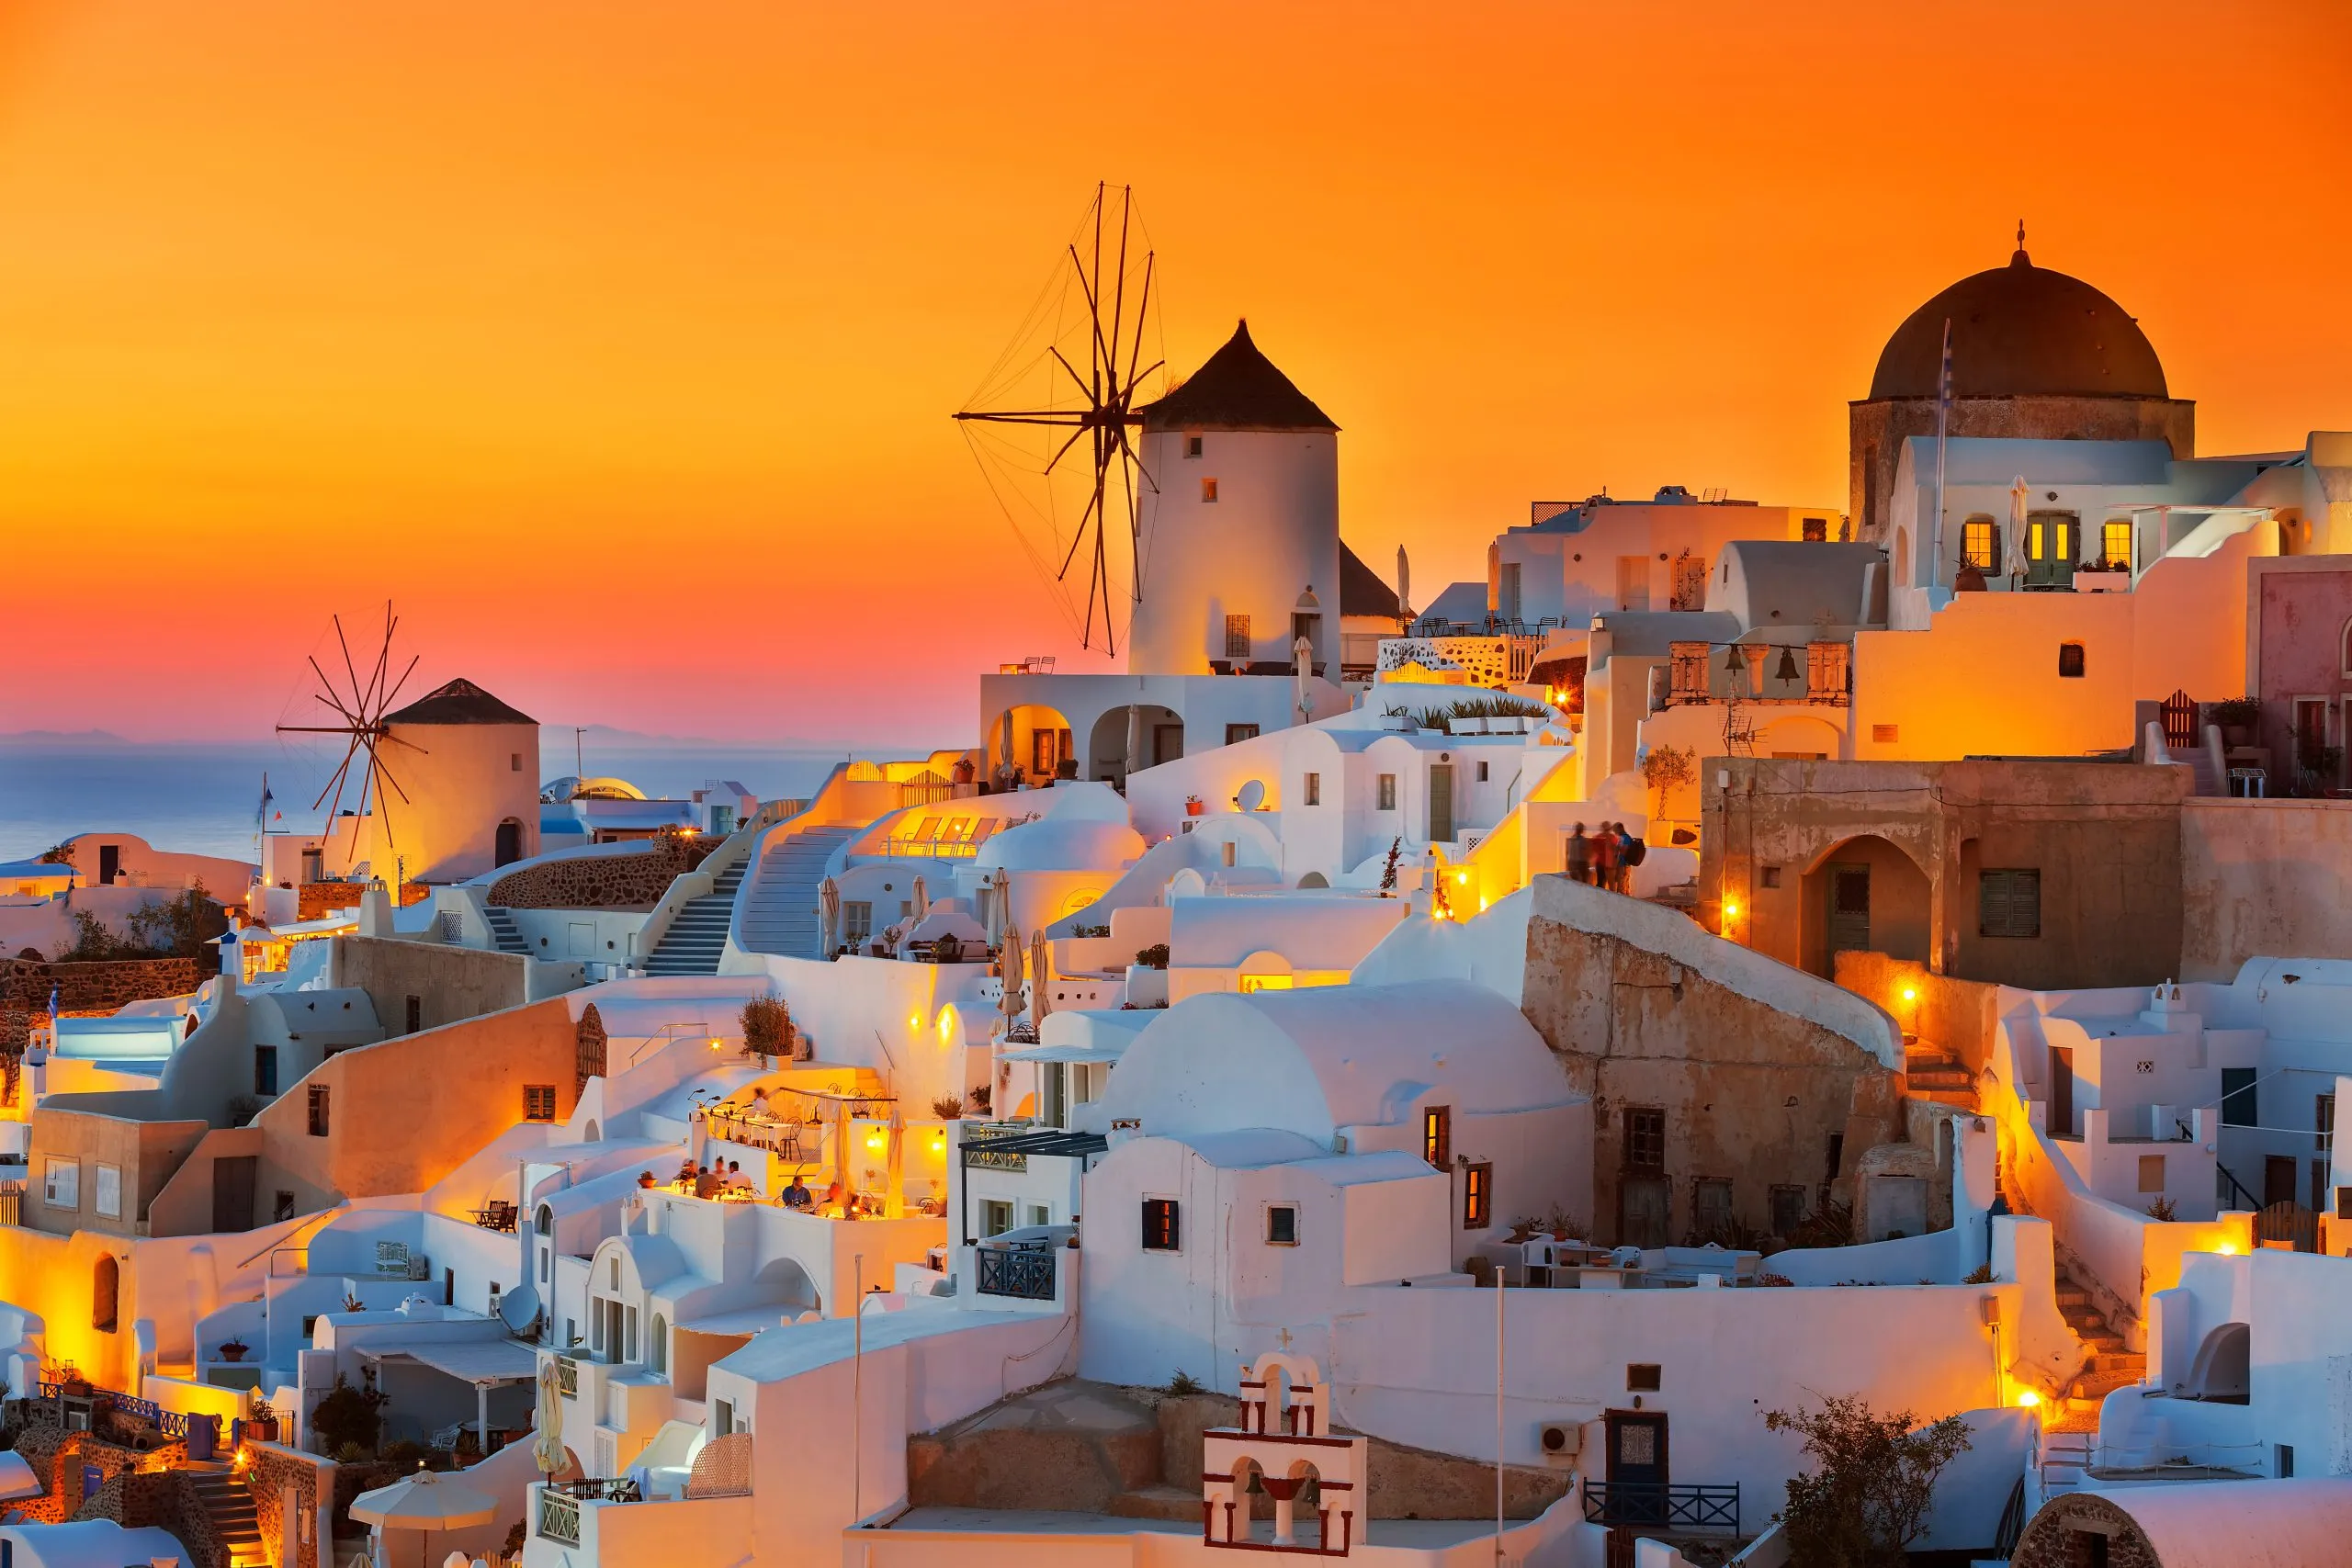 Oia at sunset